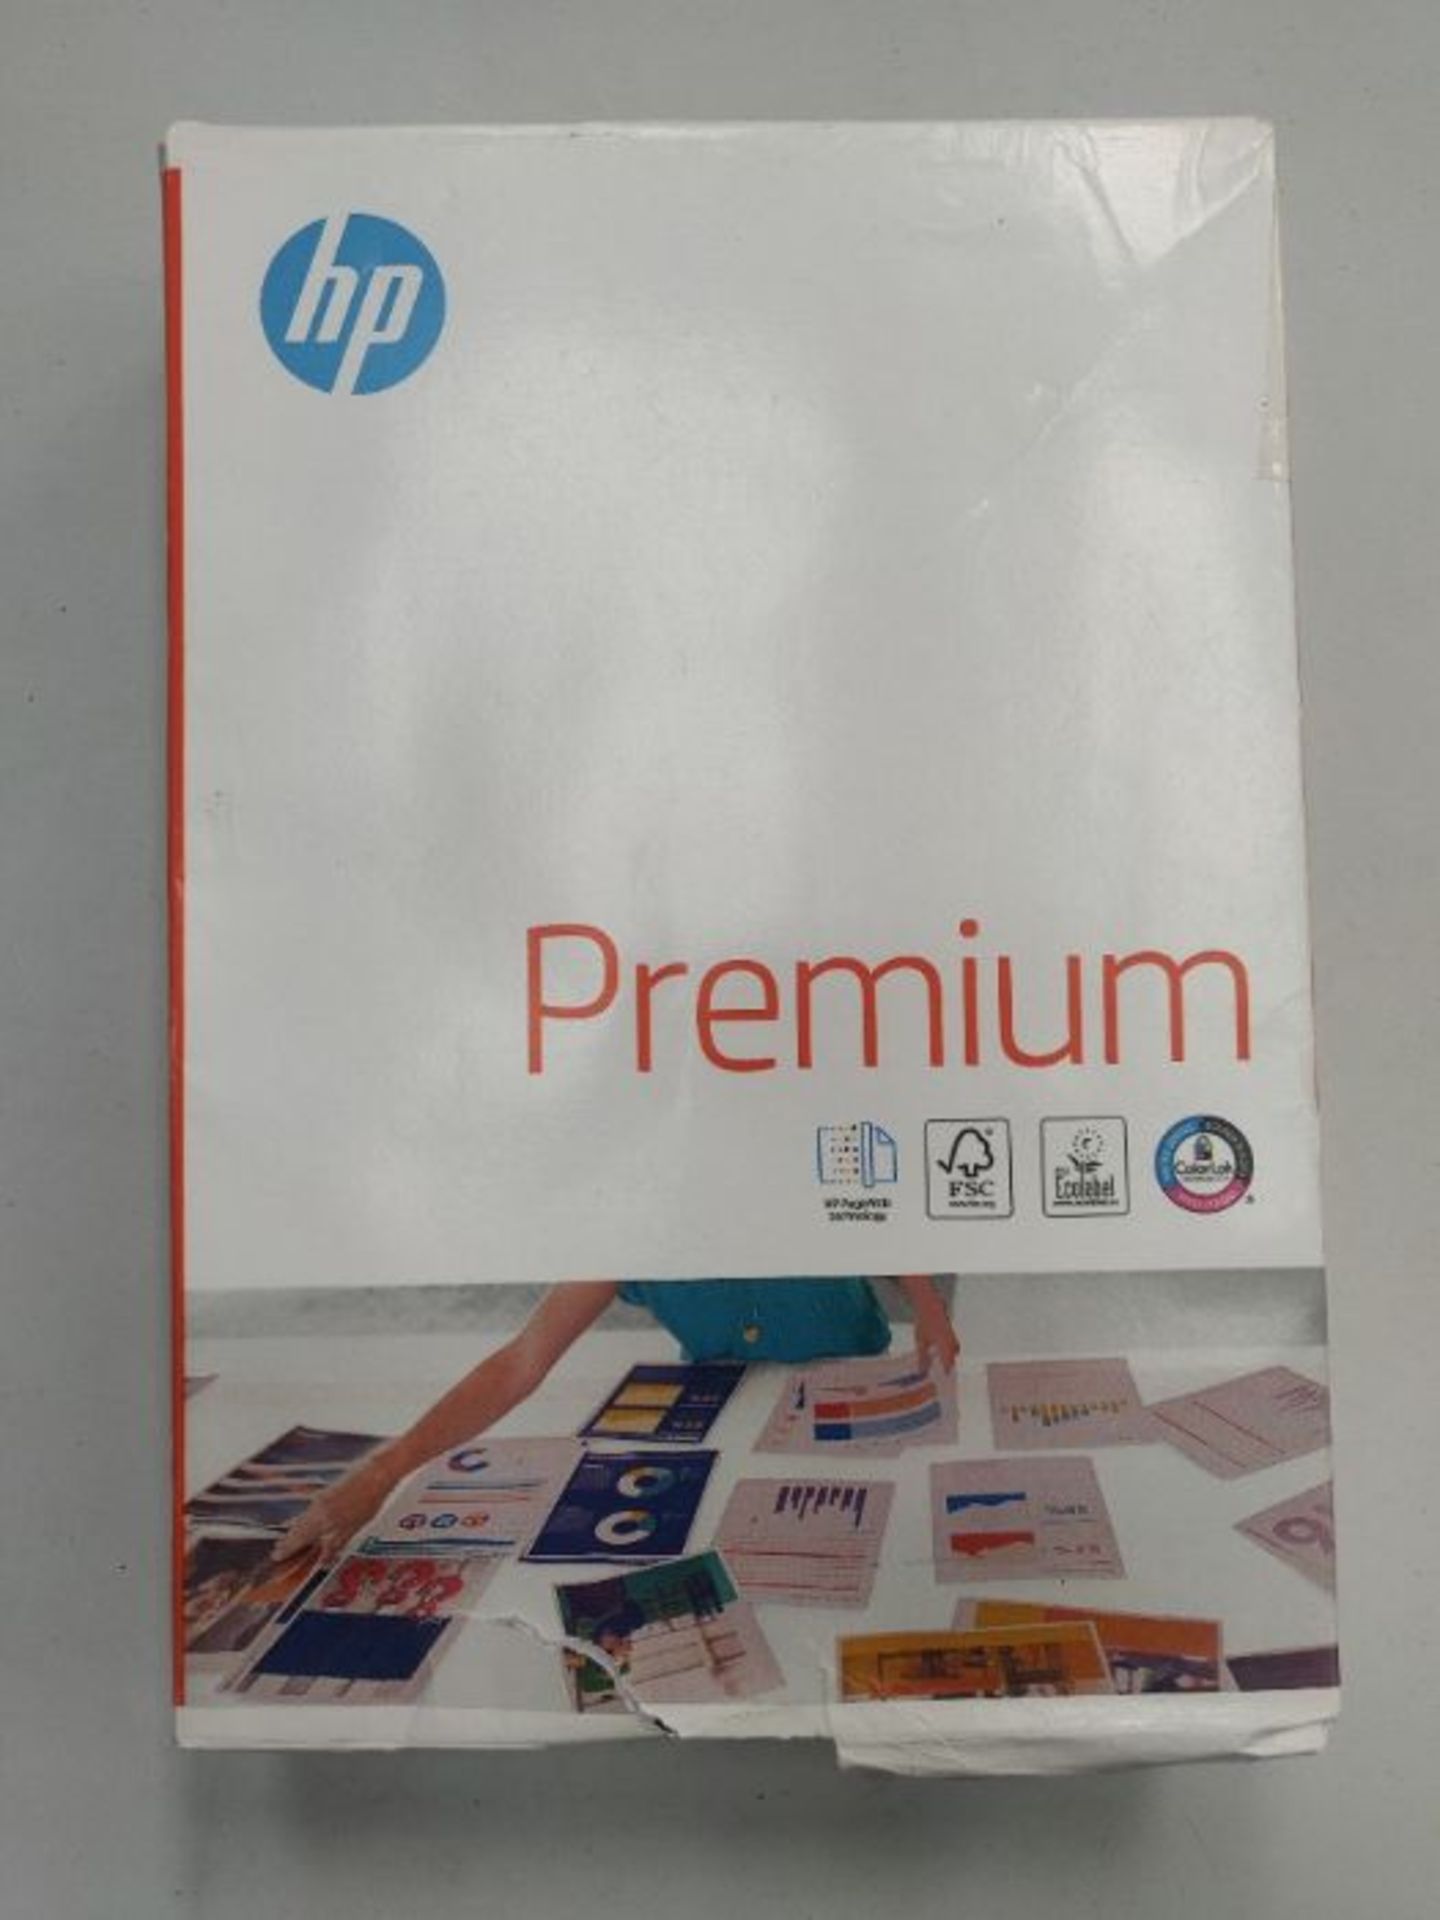 HP Papers CHP852 A4 90 gsm FSC Premium Paper, White - Image 2 of 2